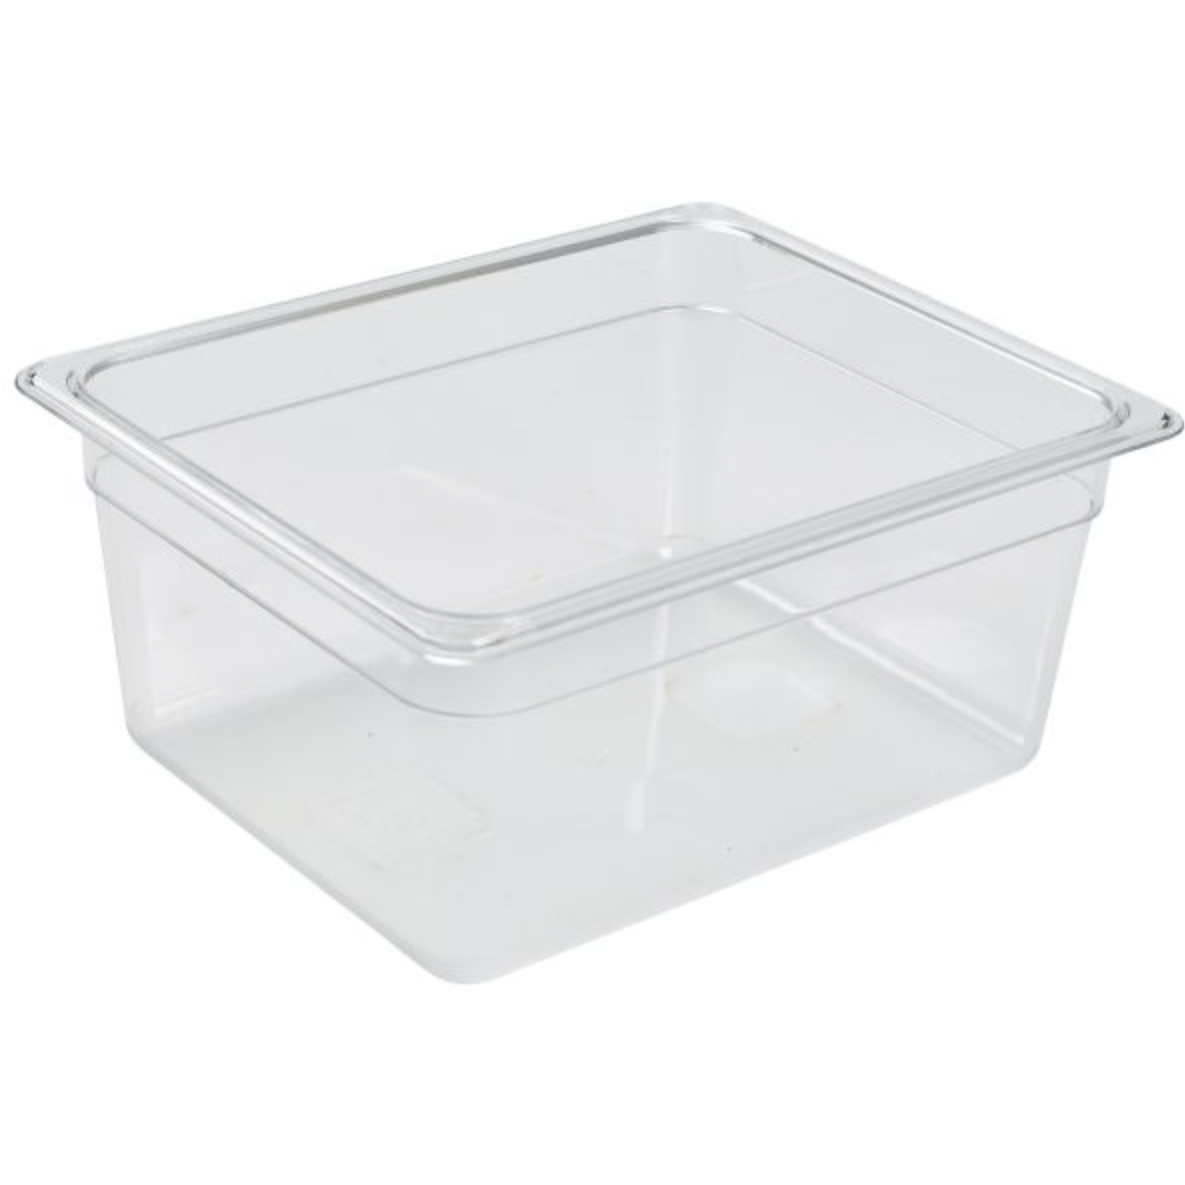 GenWare 1/2 -Polycarbonate GN Pan 150mm Clear